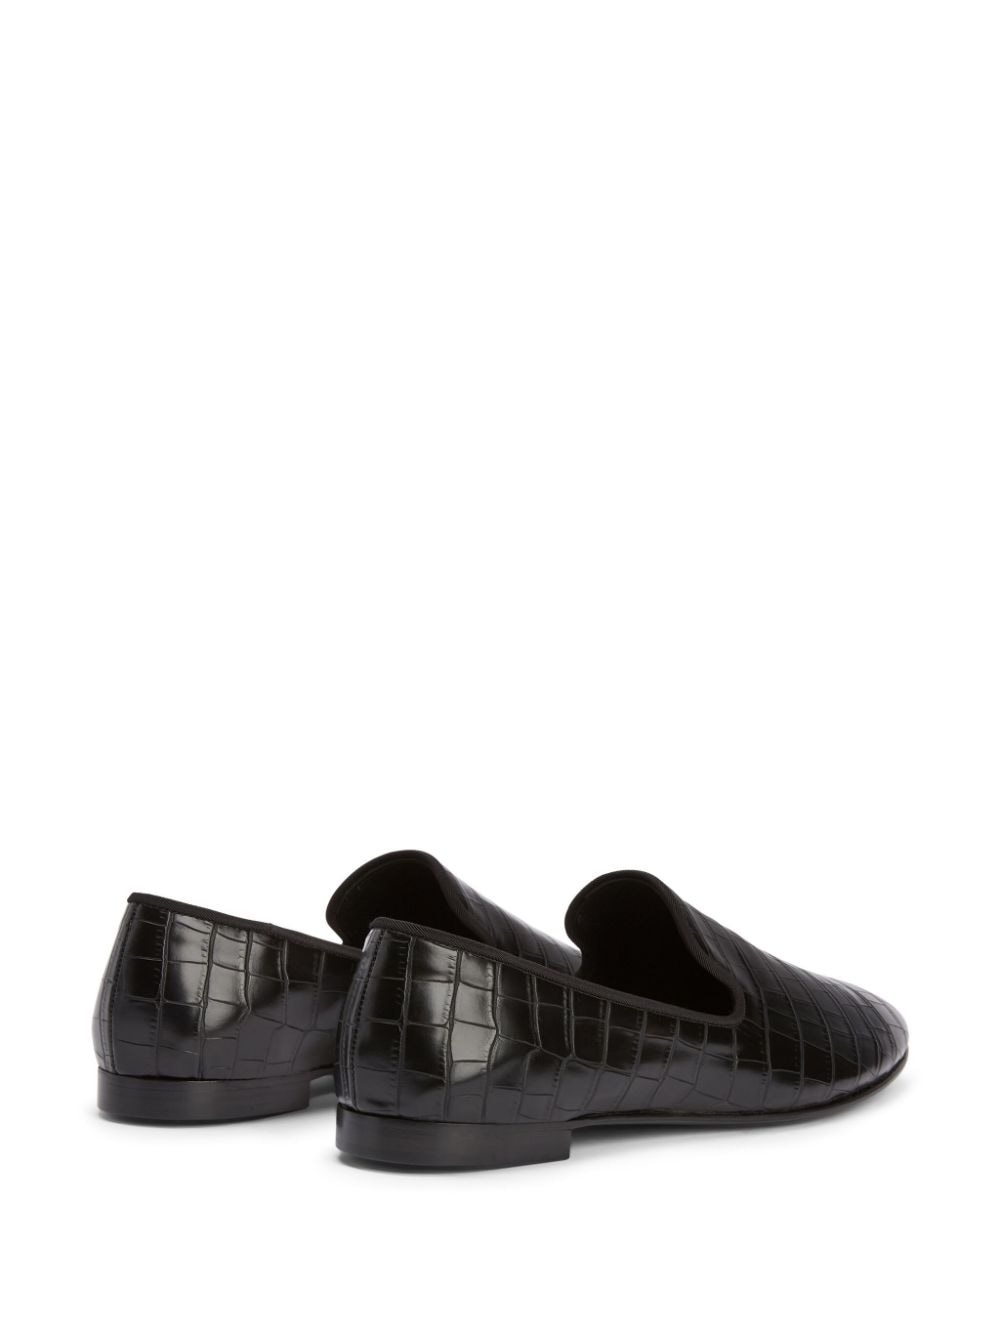 Seymour embossed leather loafers - 3